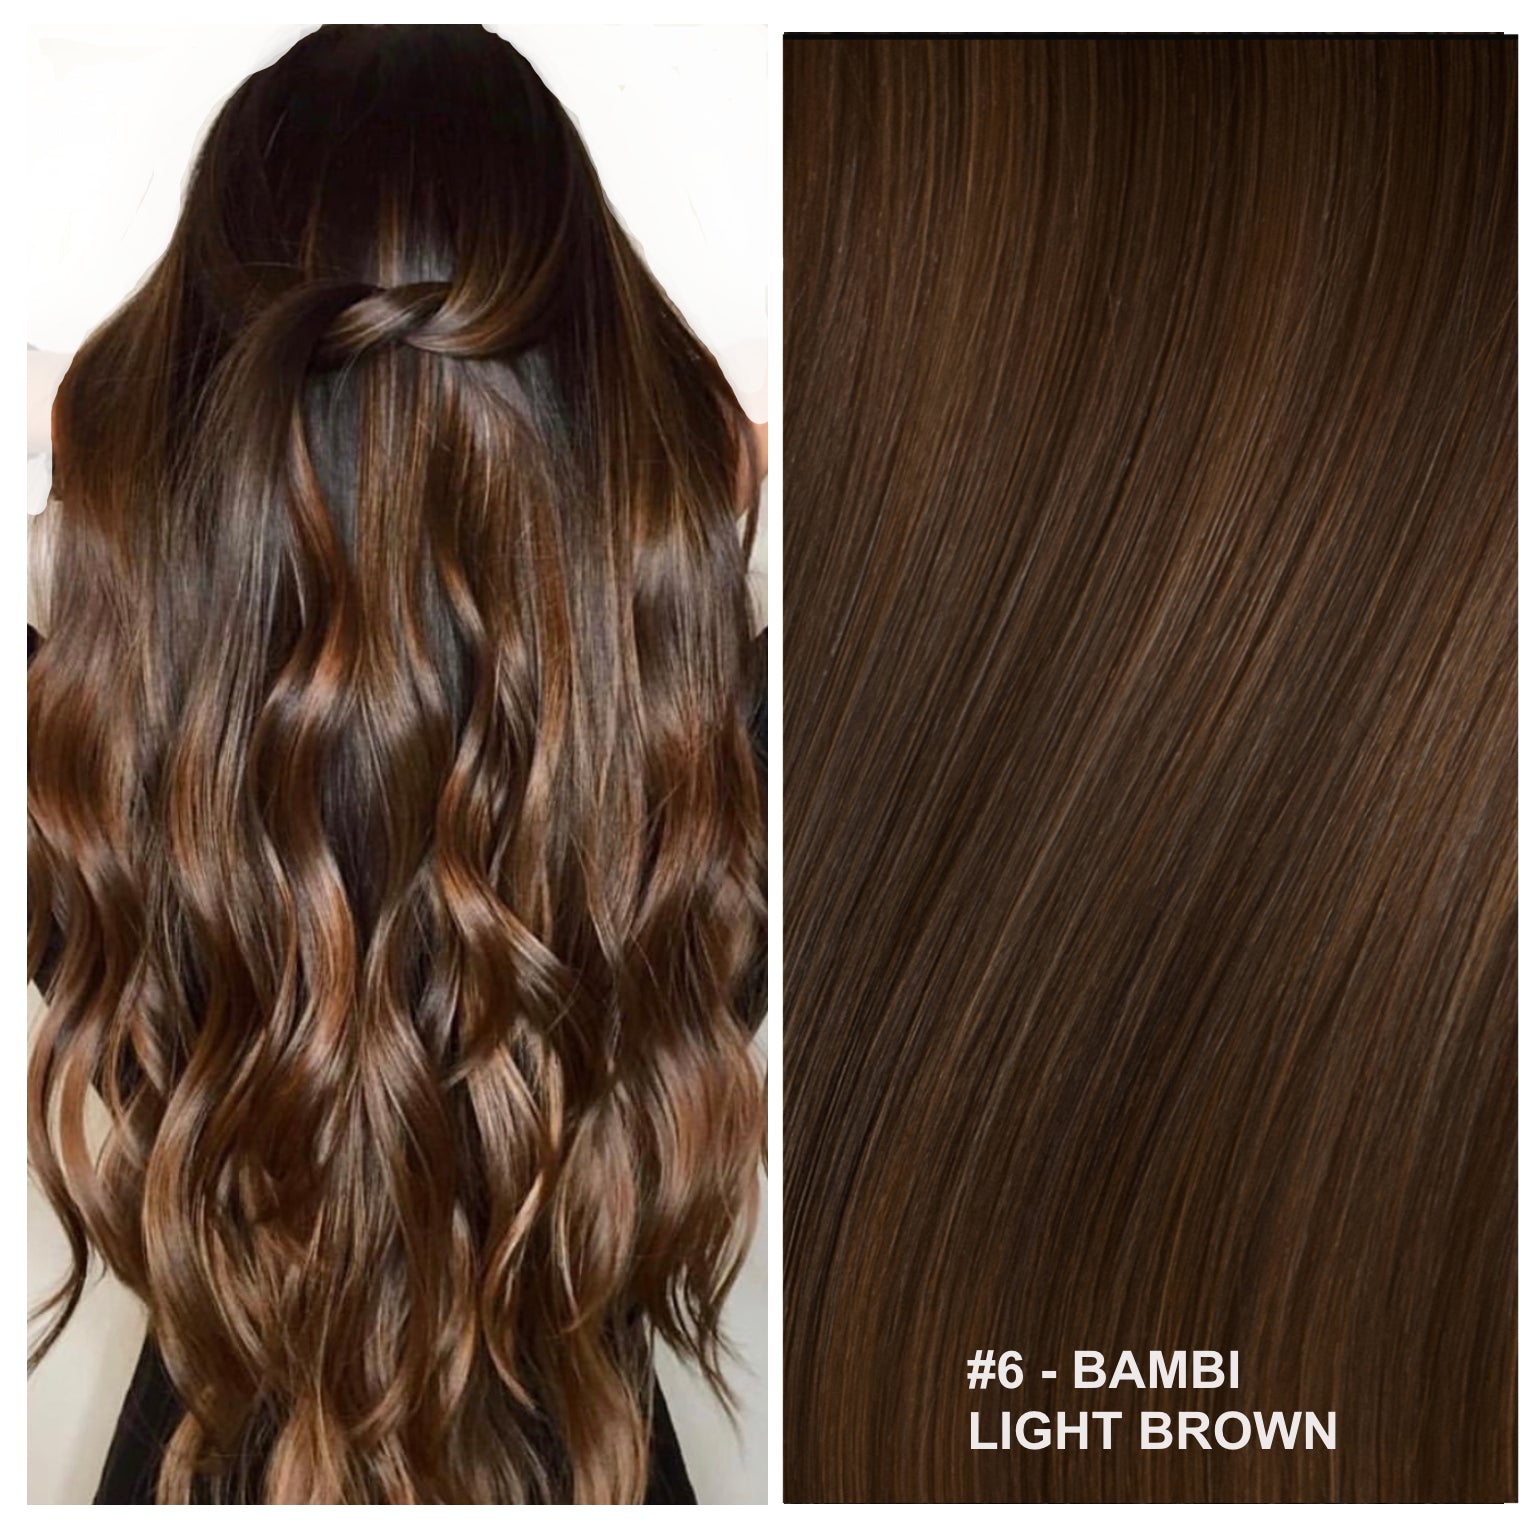 RUSSIAN TAPE HAIR EXTENSIONS #6 - BAMBI - LIGHT BROWN